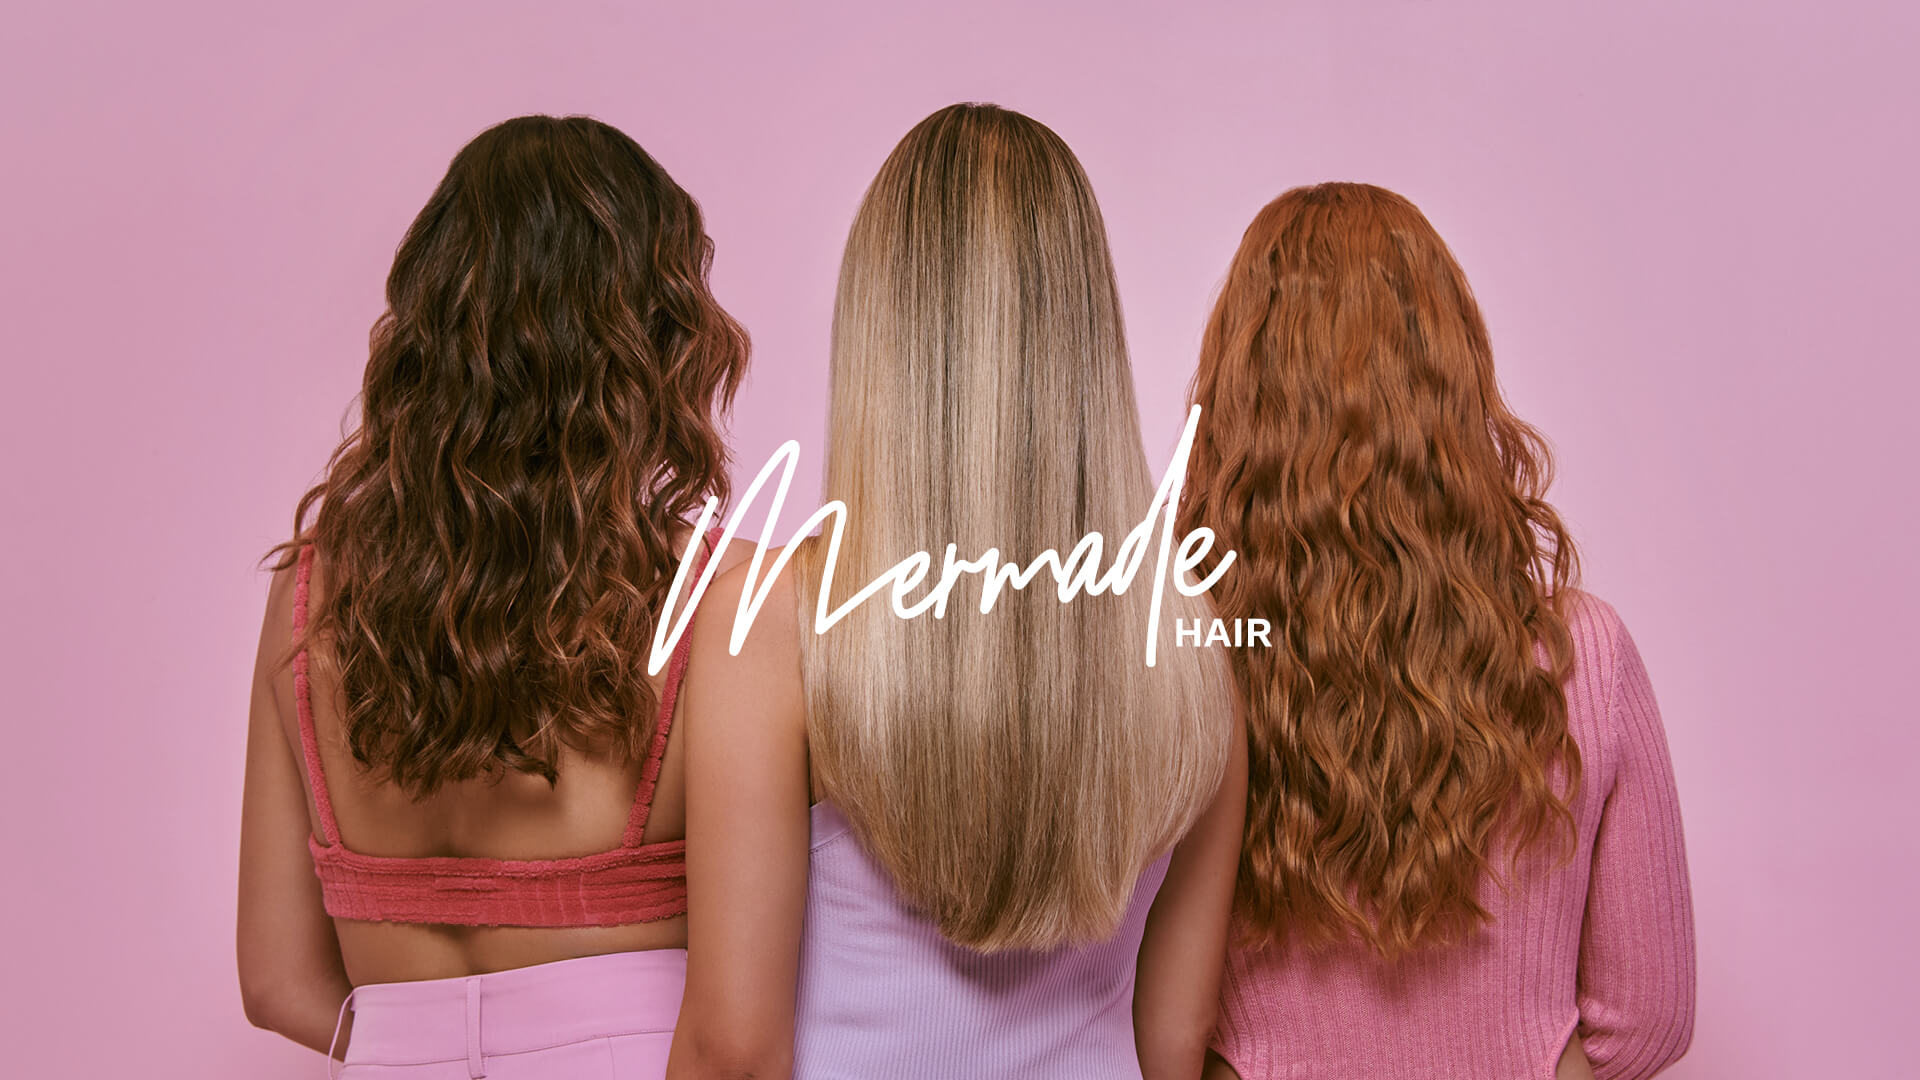 Mermade Hair Haircare Packaging, Art Direction and Campaign By One&Other